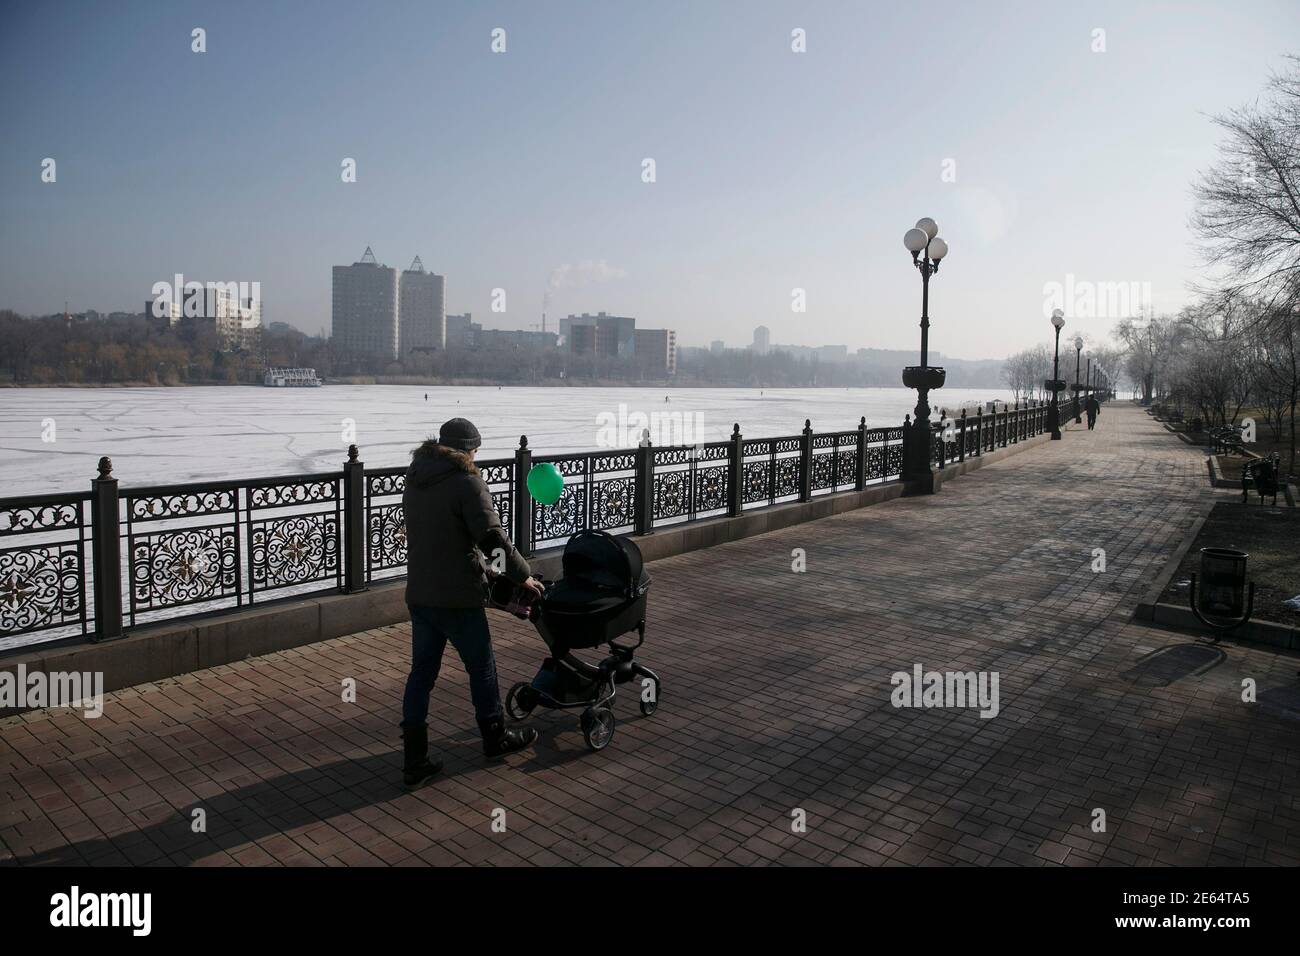 A man pushes a stroller near a frozen river in Donetsk, February 15, 2015. The Ukrainian military said on Sunday a ceasefire between government troops and pro-Russian separatists in east Ukraine is being observed 'in general' and that rebel attacks are infrequent and not widespread . REUTERS/Baz Ratner (UKRAINE - Tags: CIVIL UNREST POLITICS CONFLICT SOCIETY) Stock Photo